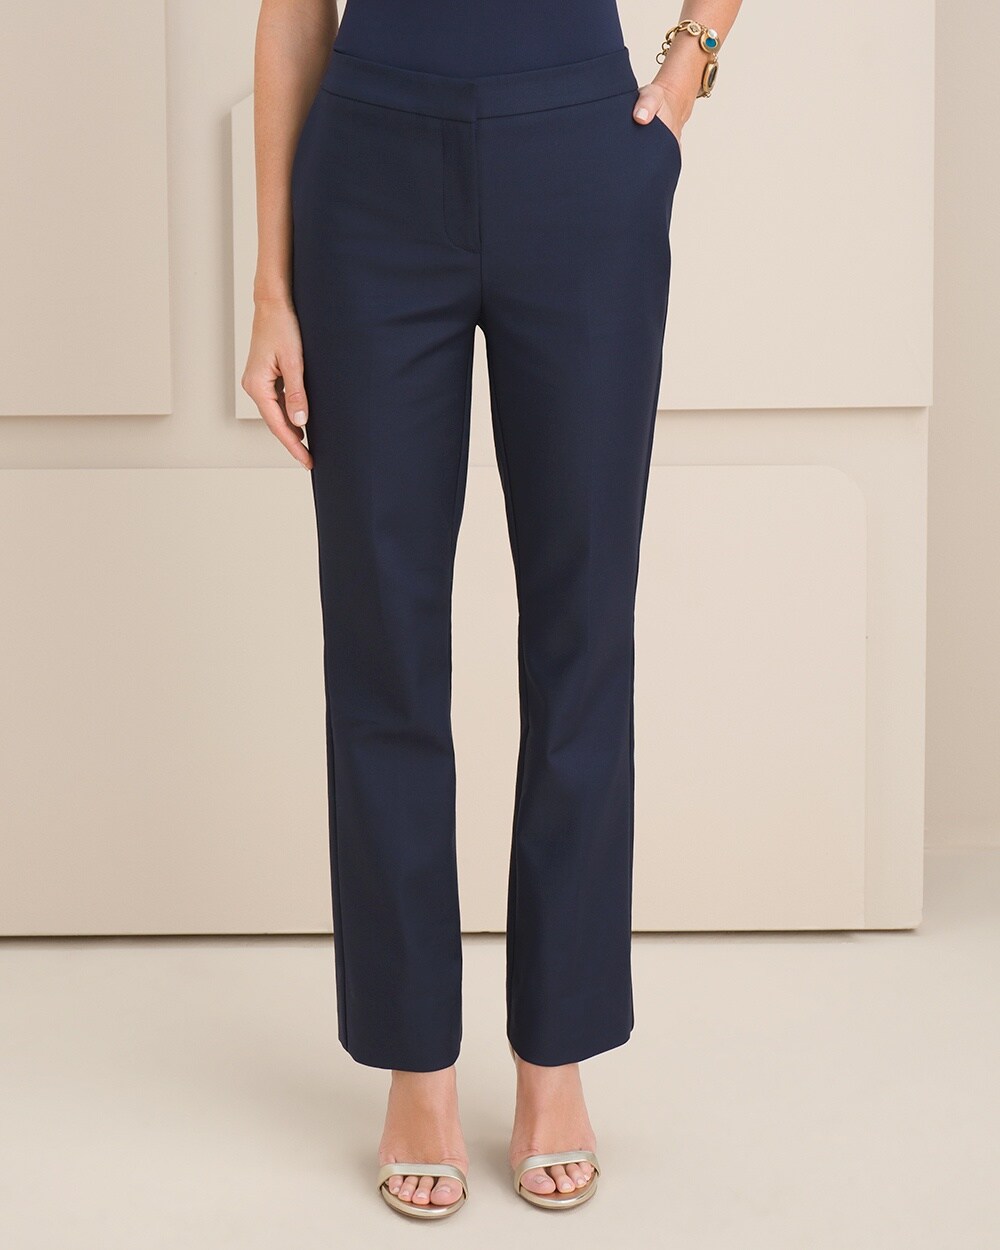 So Slimming Classic Trousers - Chico's